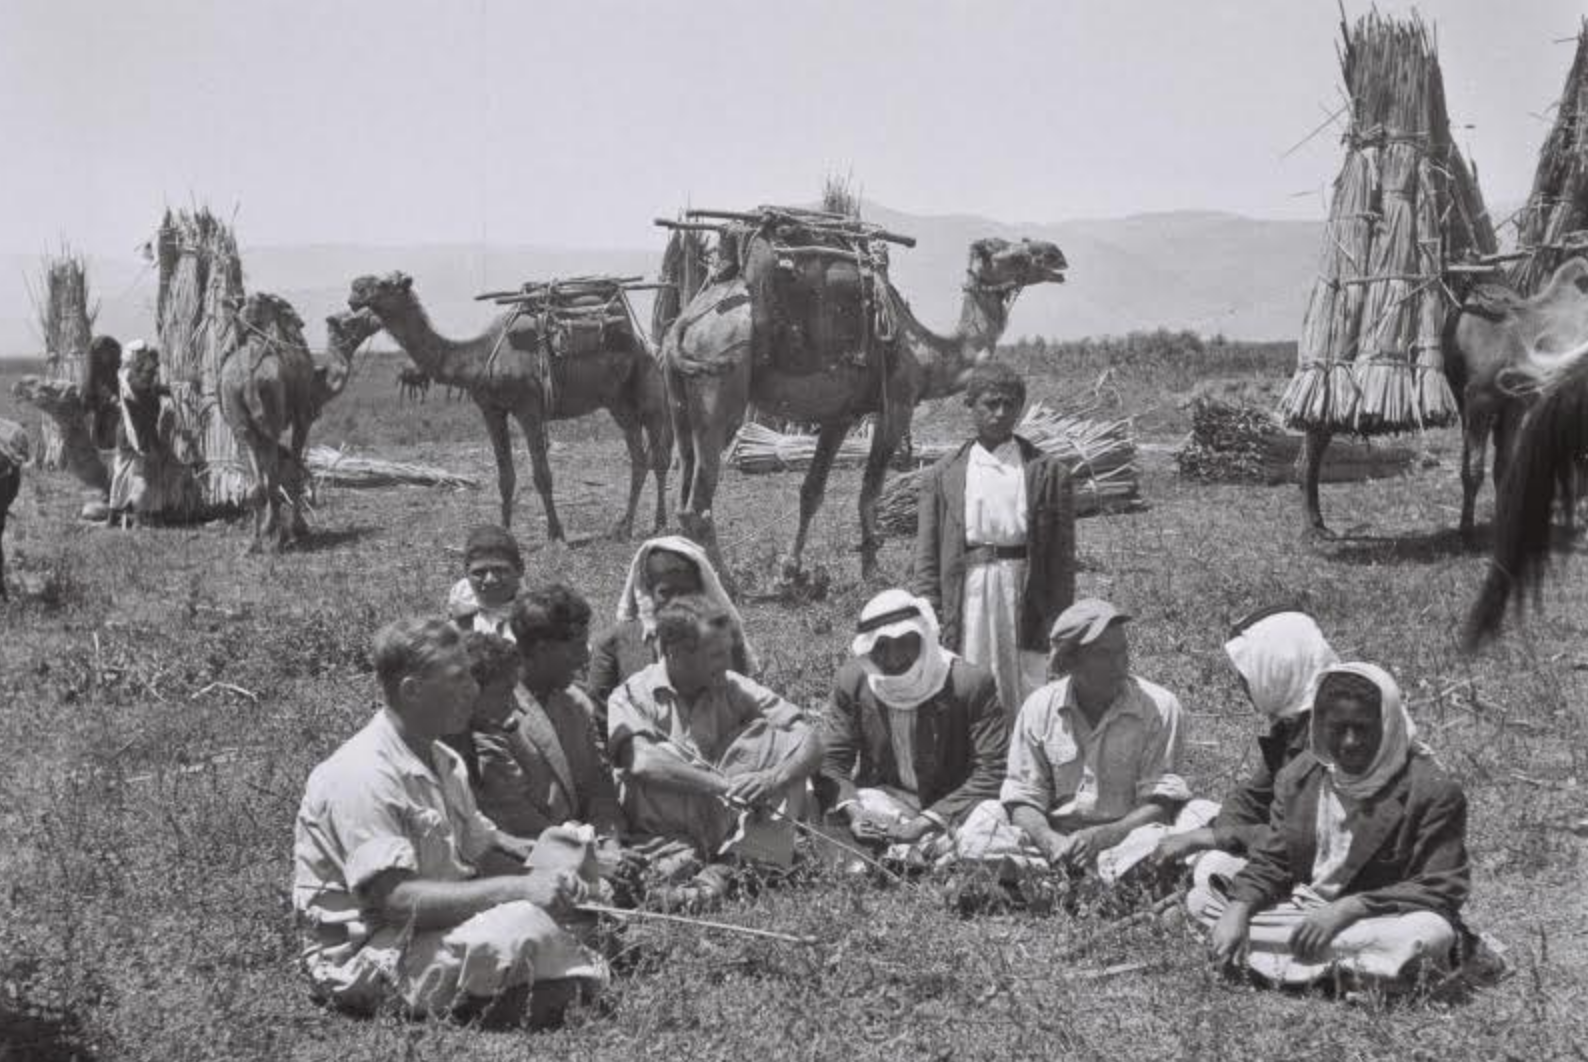 Palestinian farmers and their Jewish neighbors in the Lake Hula area, northern Palestine, 1946. (Zoltan Kluger/GPO)